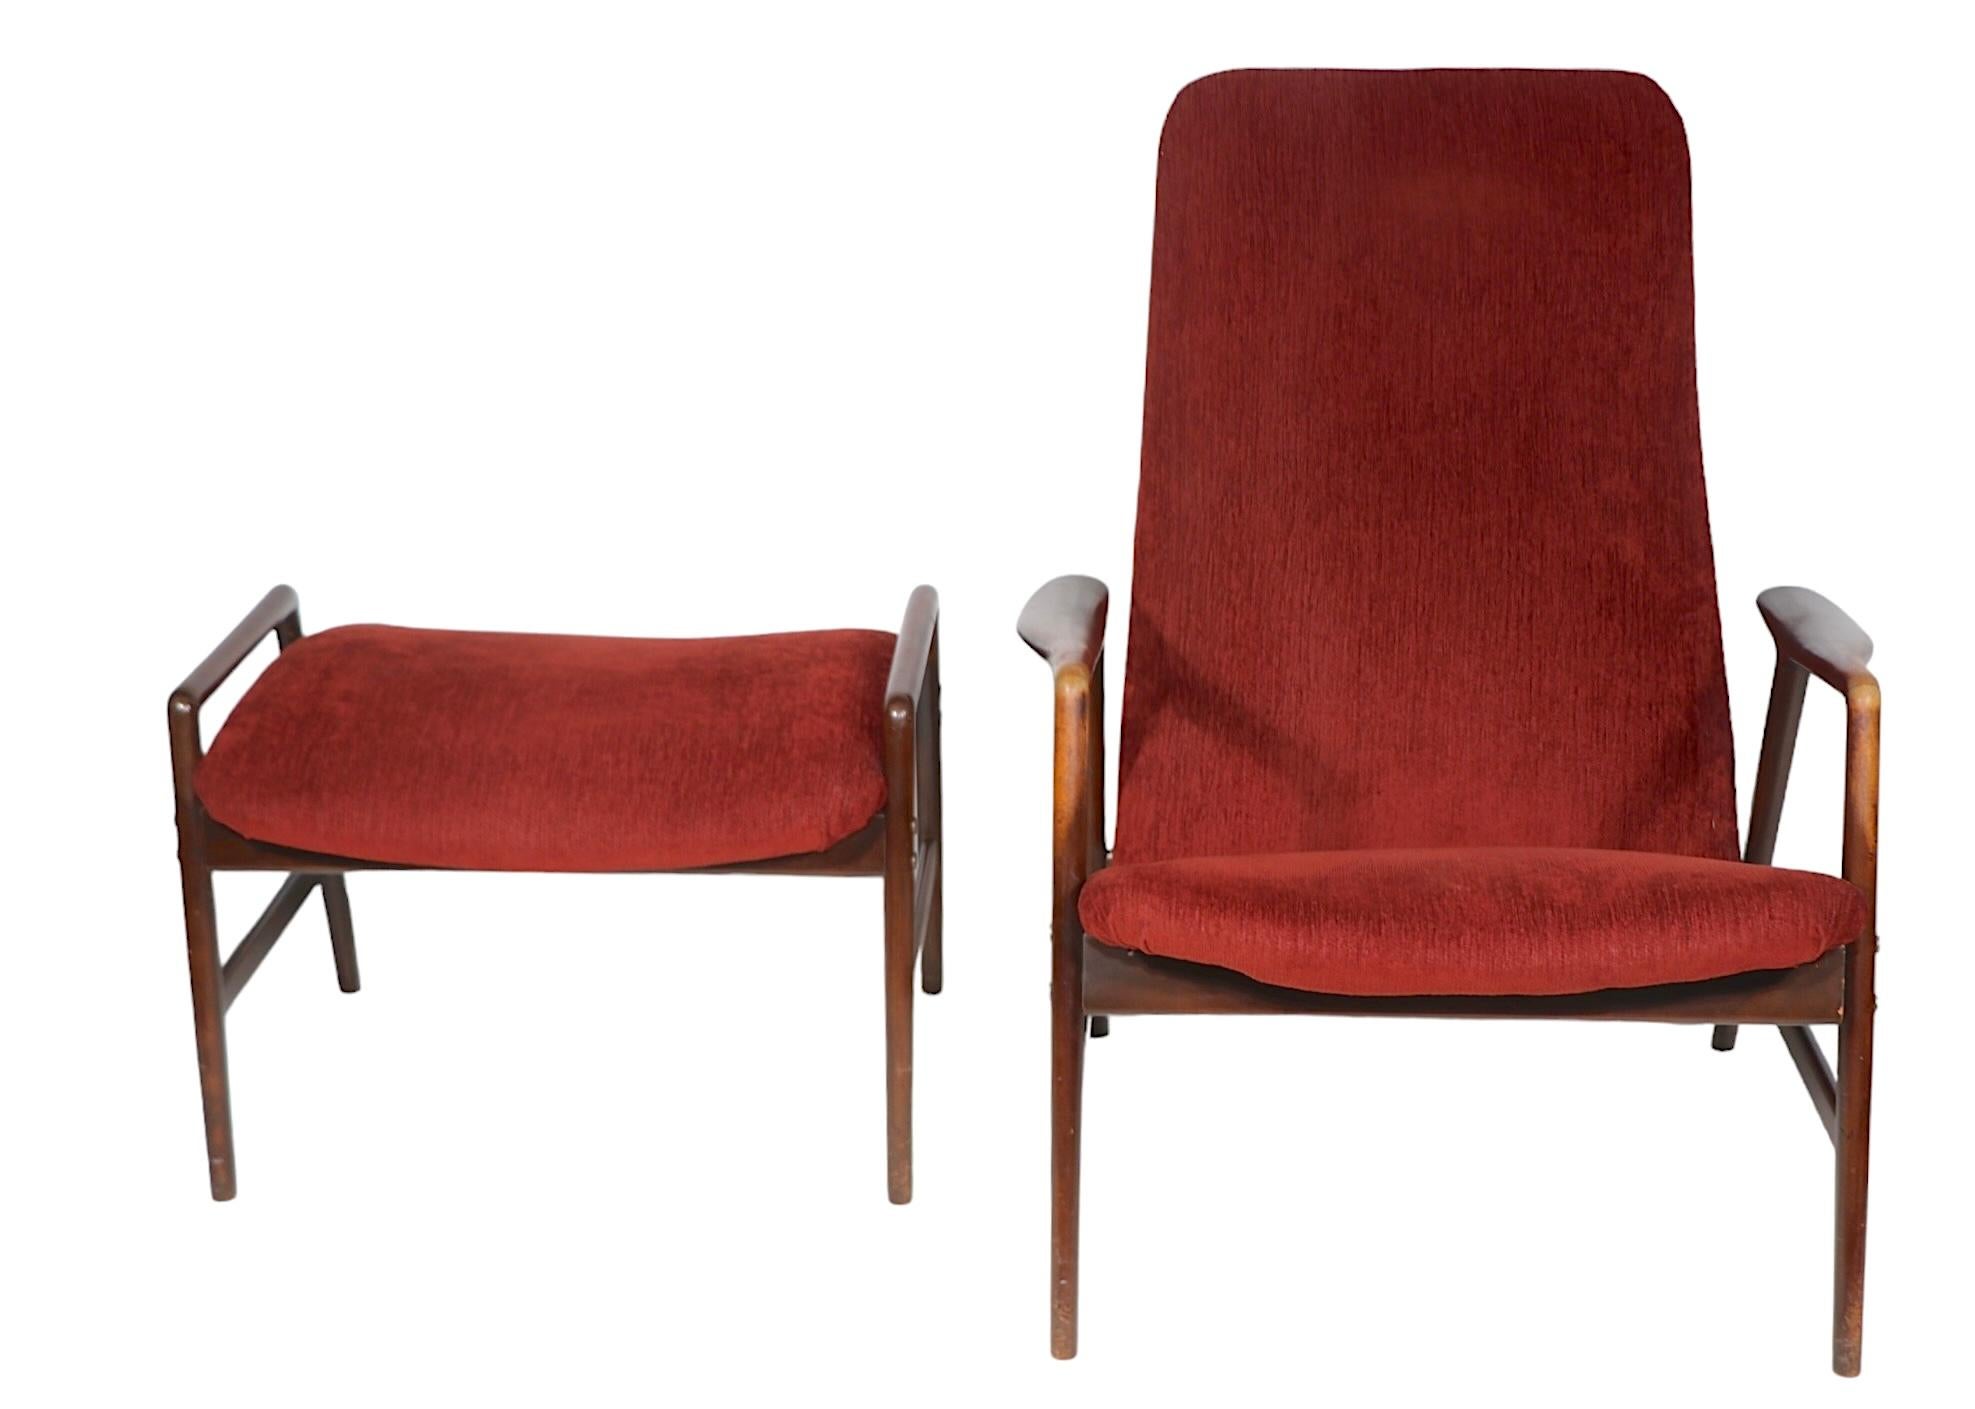 Scandinavian Modern Mid Century Lounge Chair and Ottoman by Alf Svensson for Fritz Hansen c. 1960's For Sale